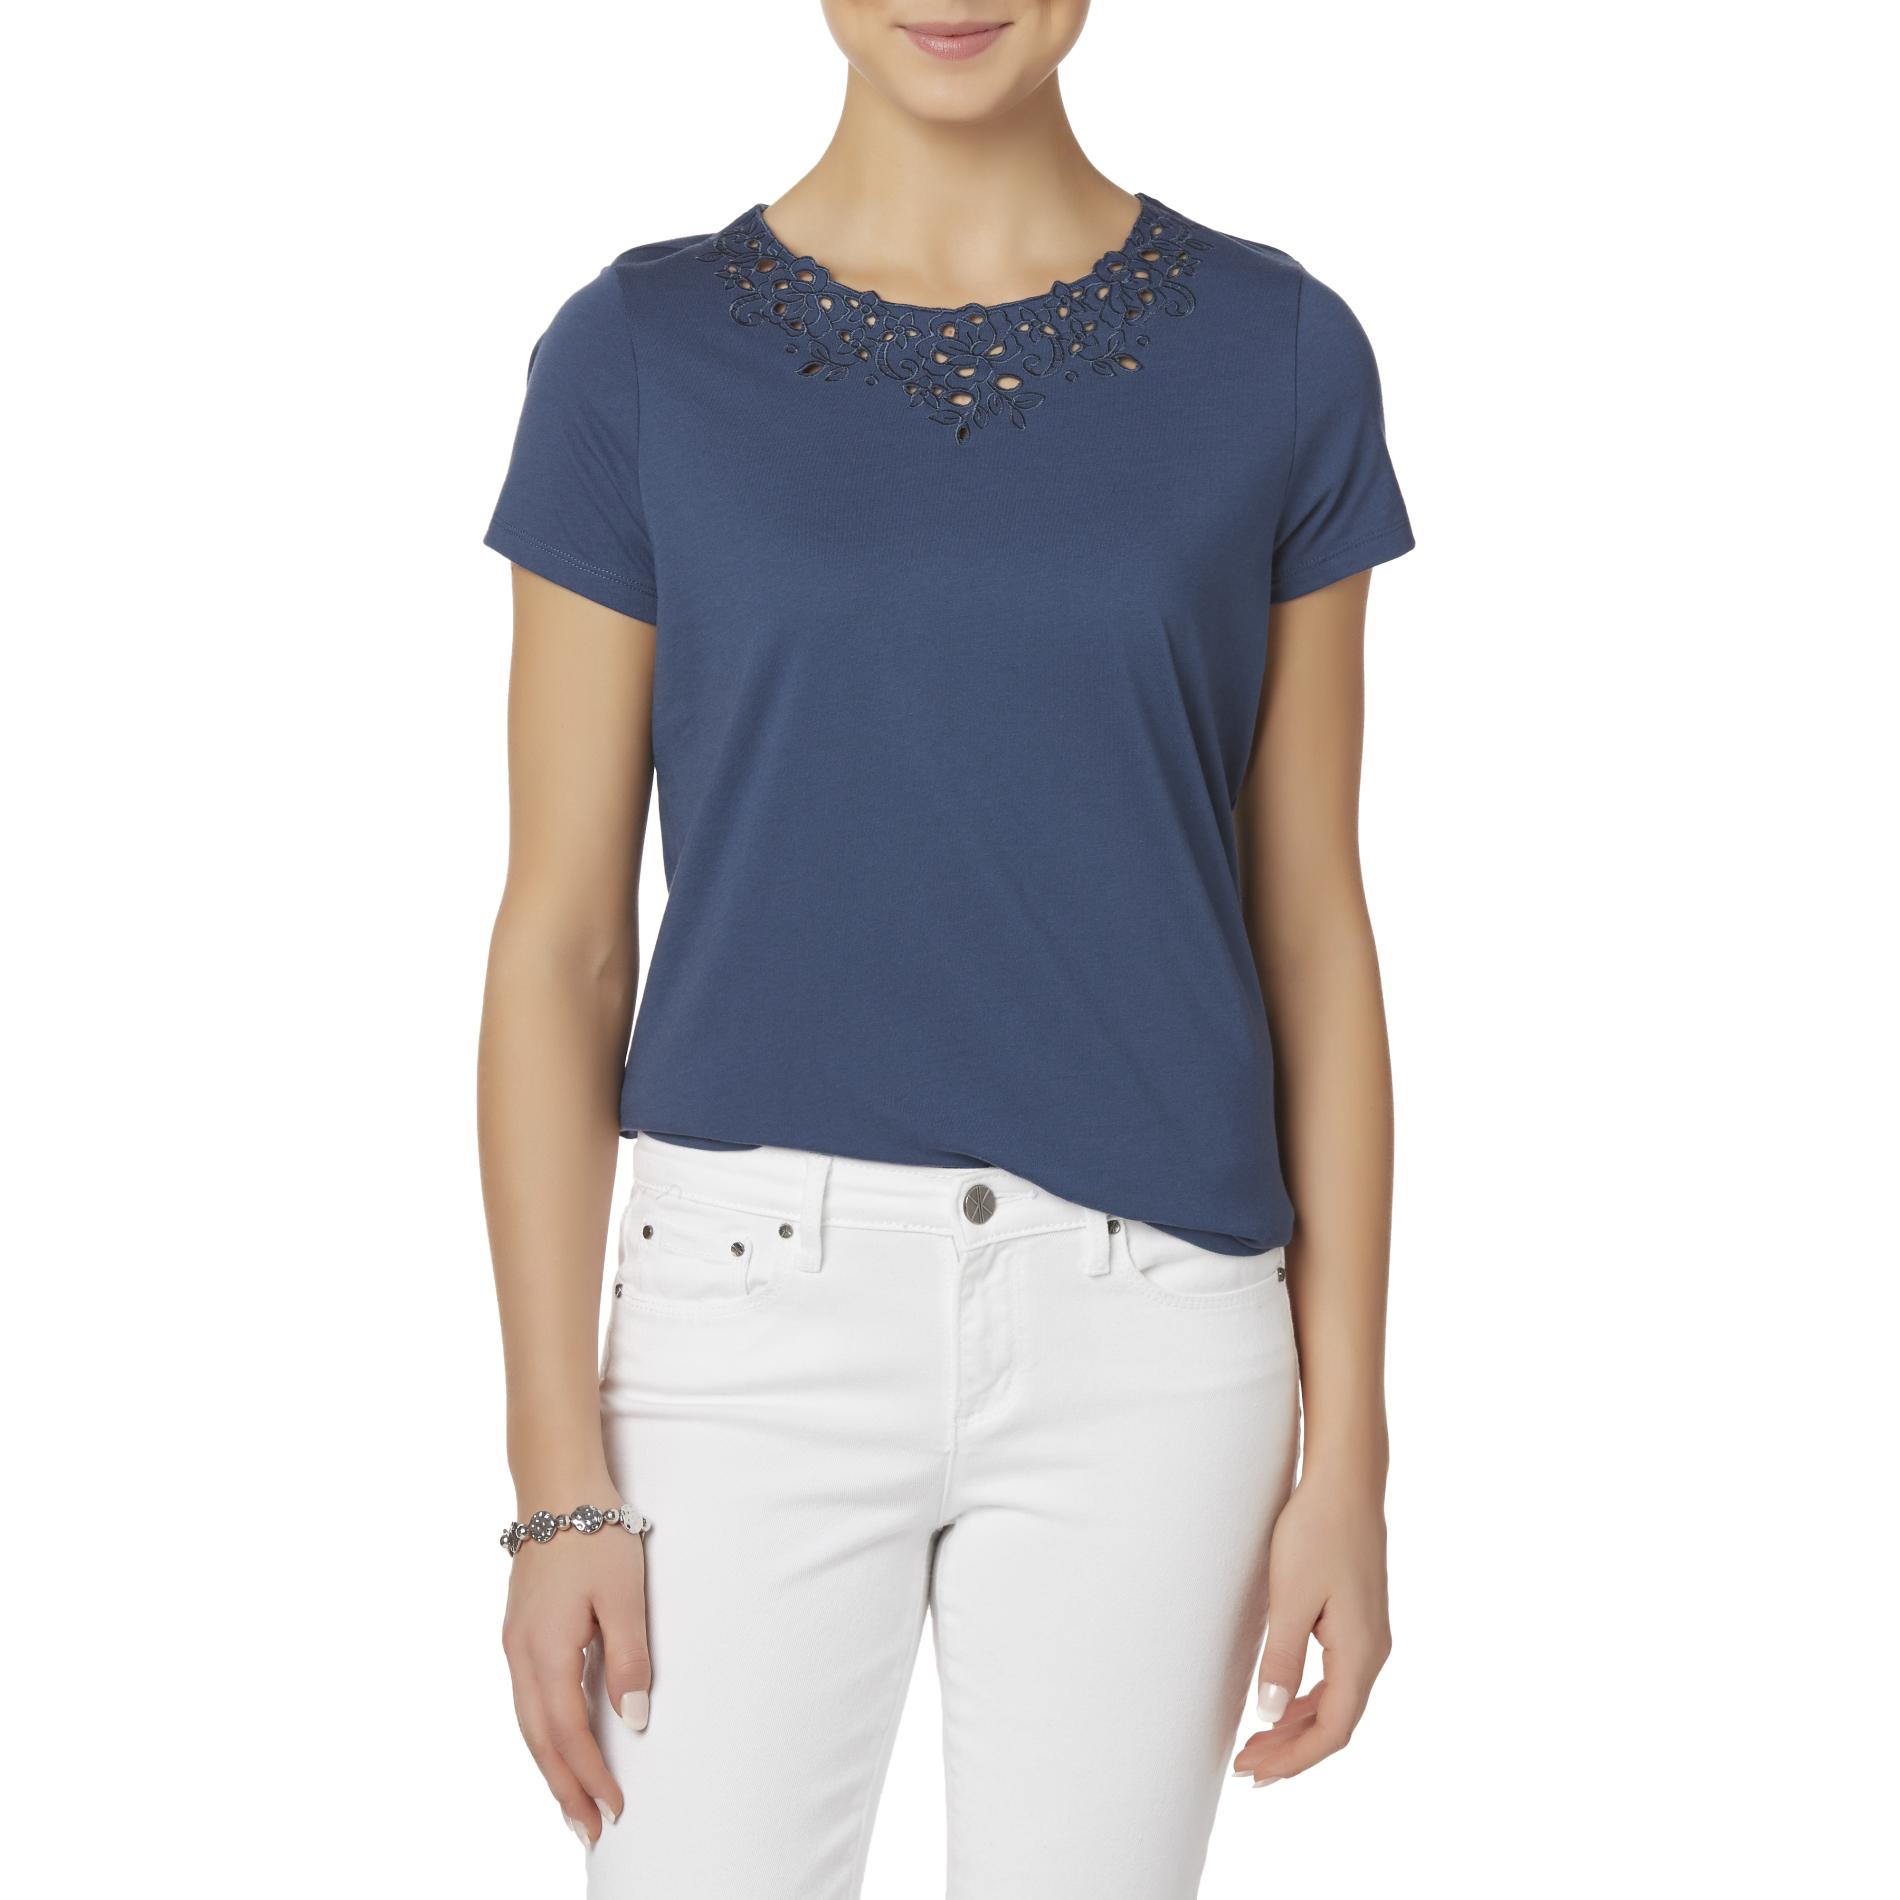 Laura Scott Petites' Embroidered Top - Floral